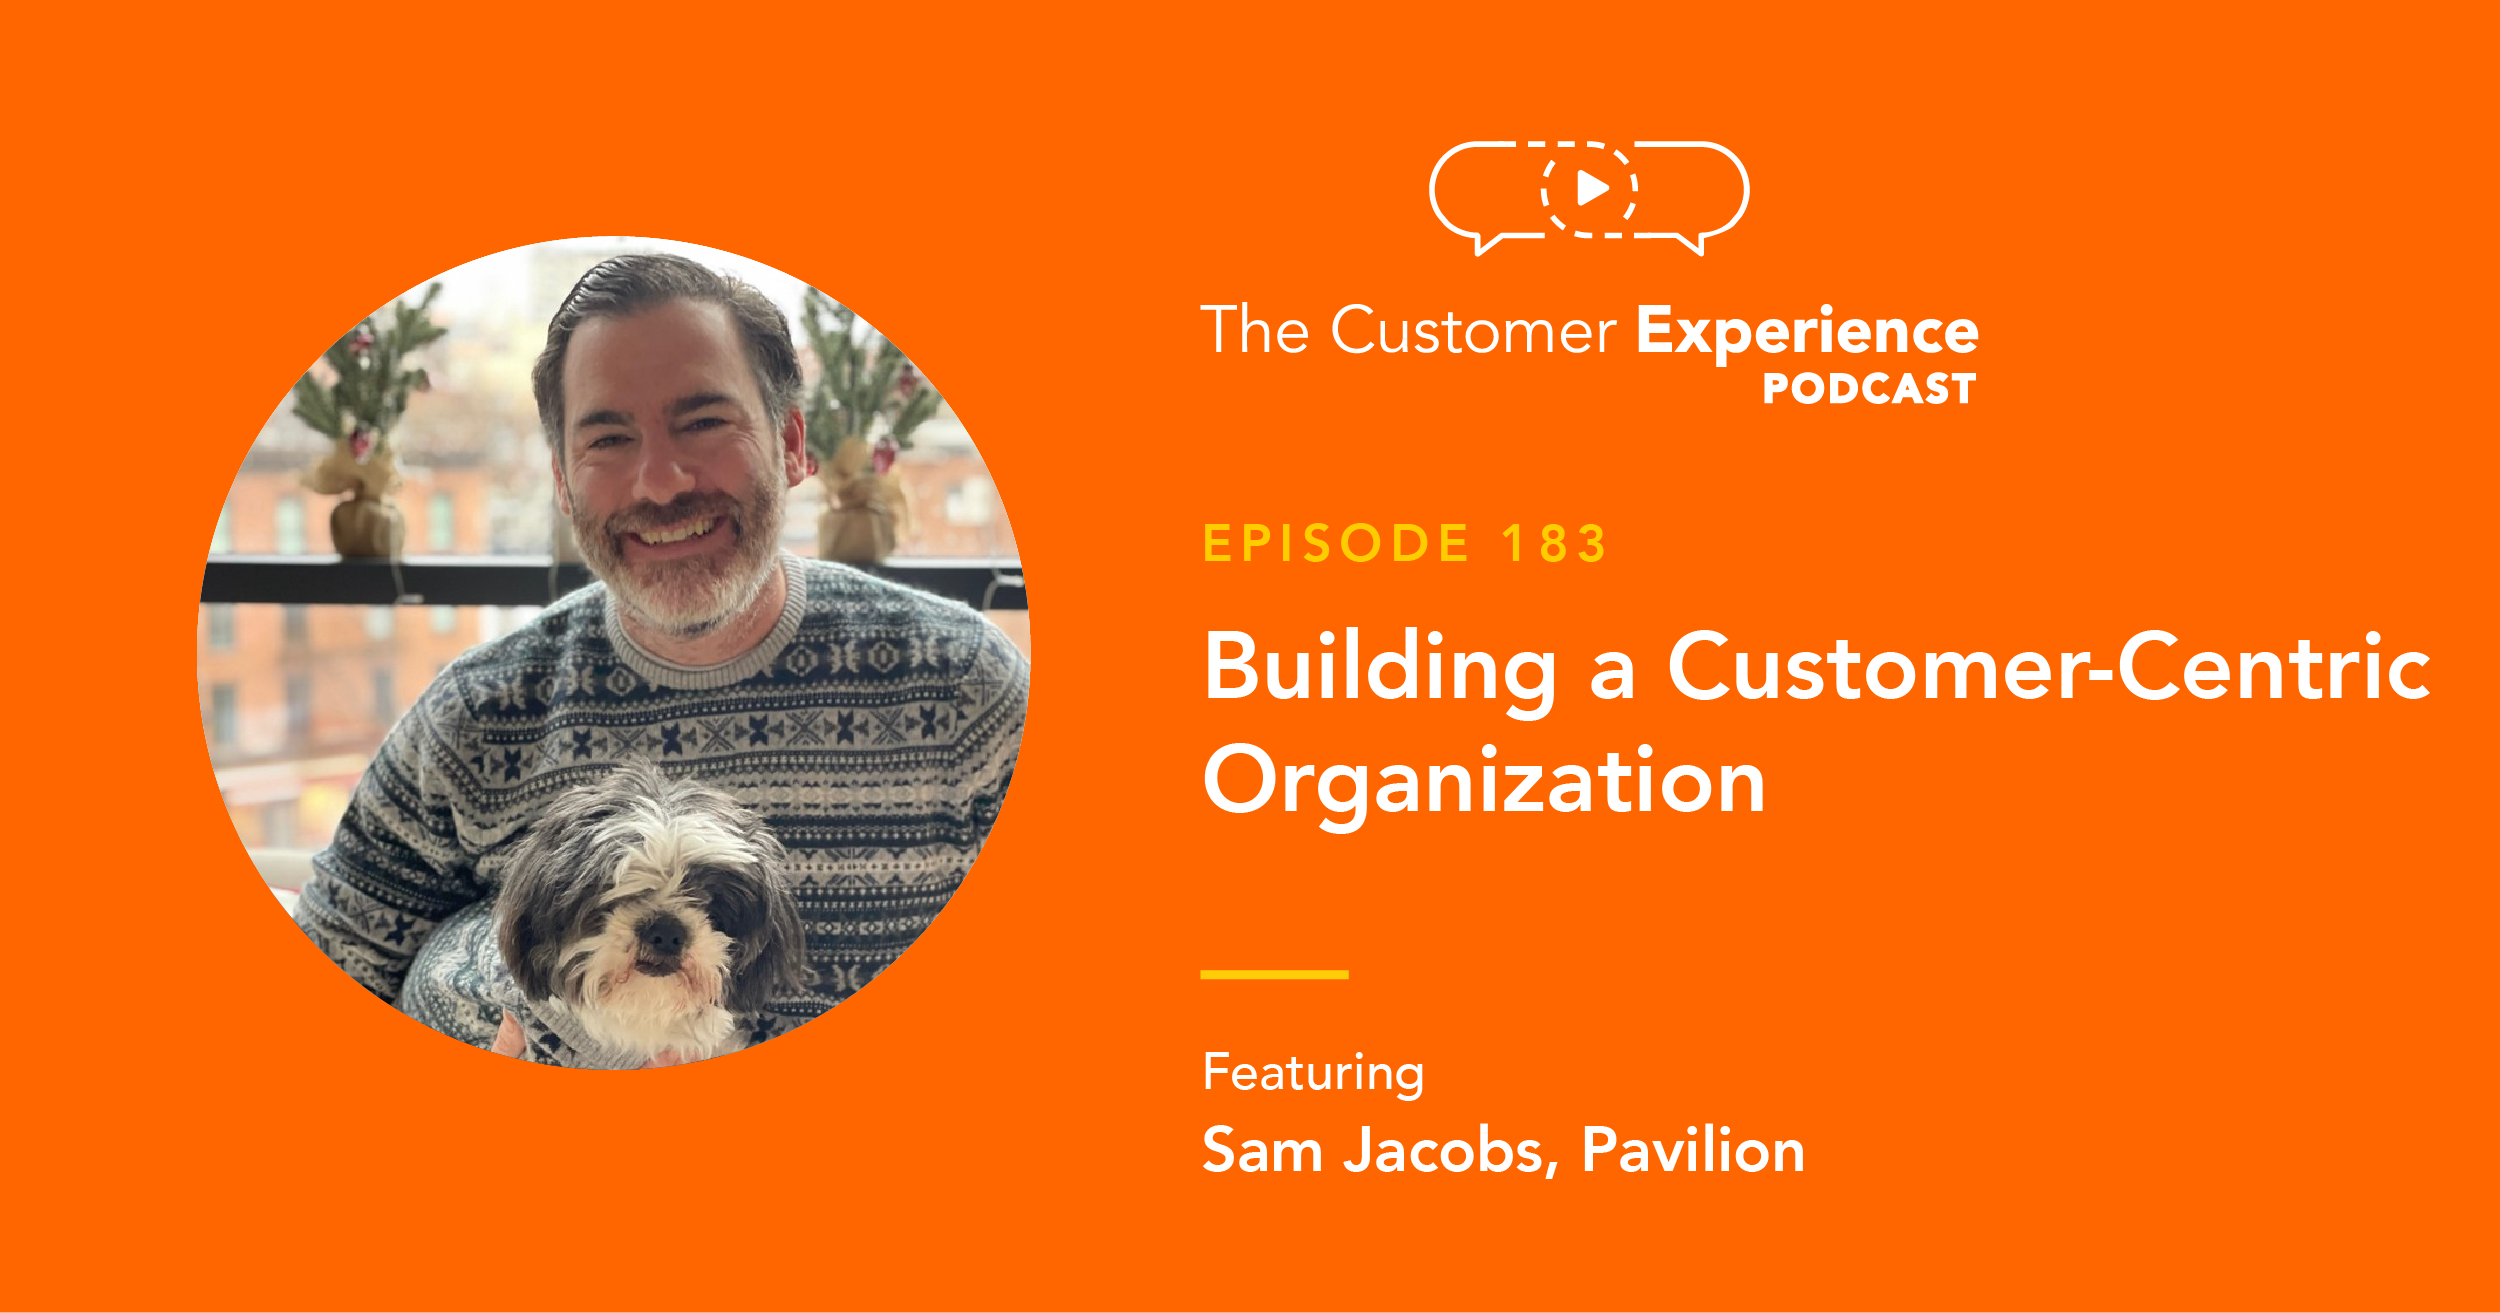 Sam Jacobs, Revenue Collective, Pavilion, The Customer Experience Podcast, customer centricity, customer-centric, customer focused, company culture, company values, listening